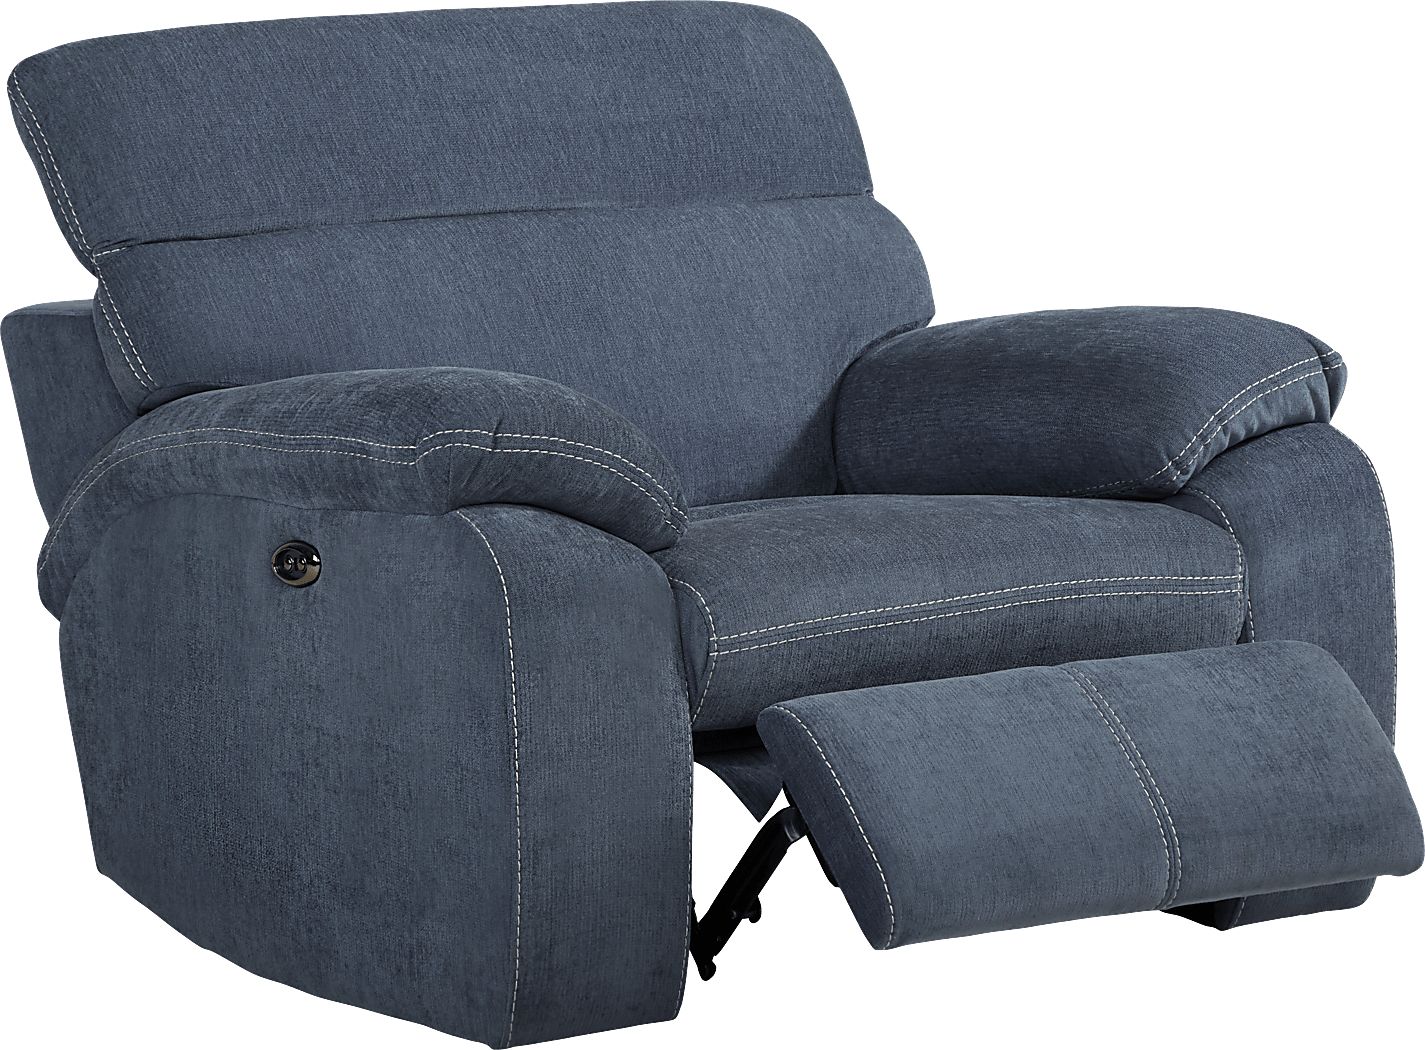 Crescent Place Navy Power Recliner